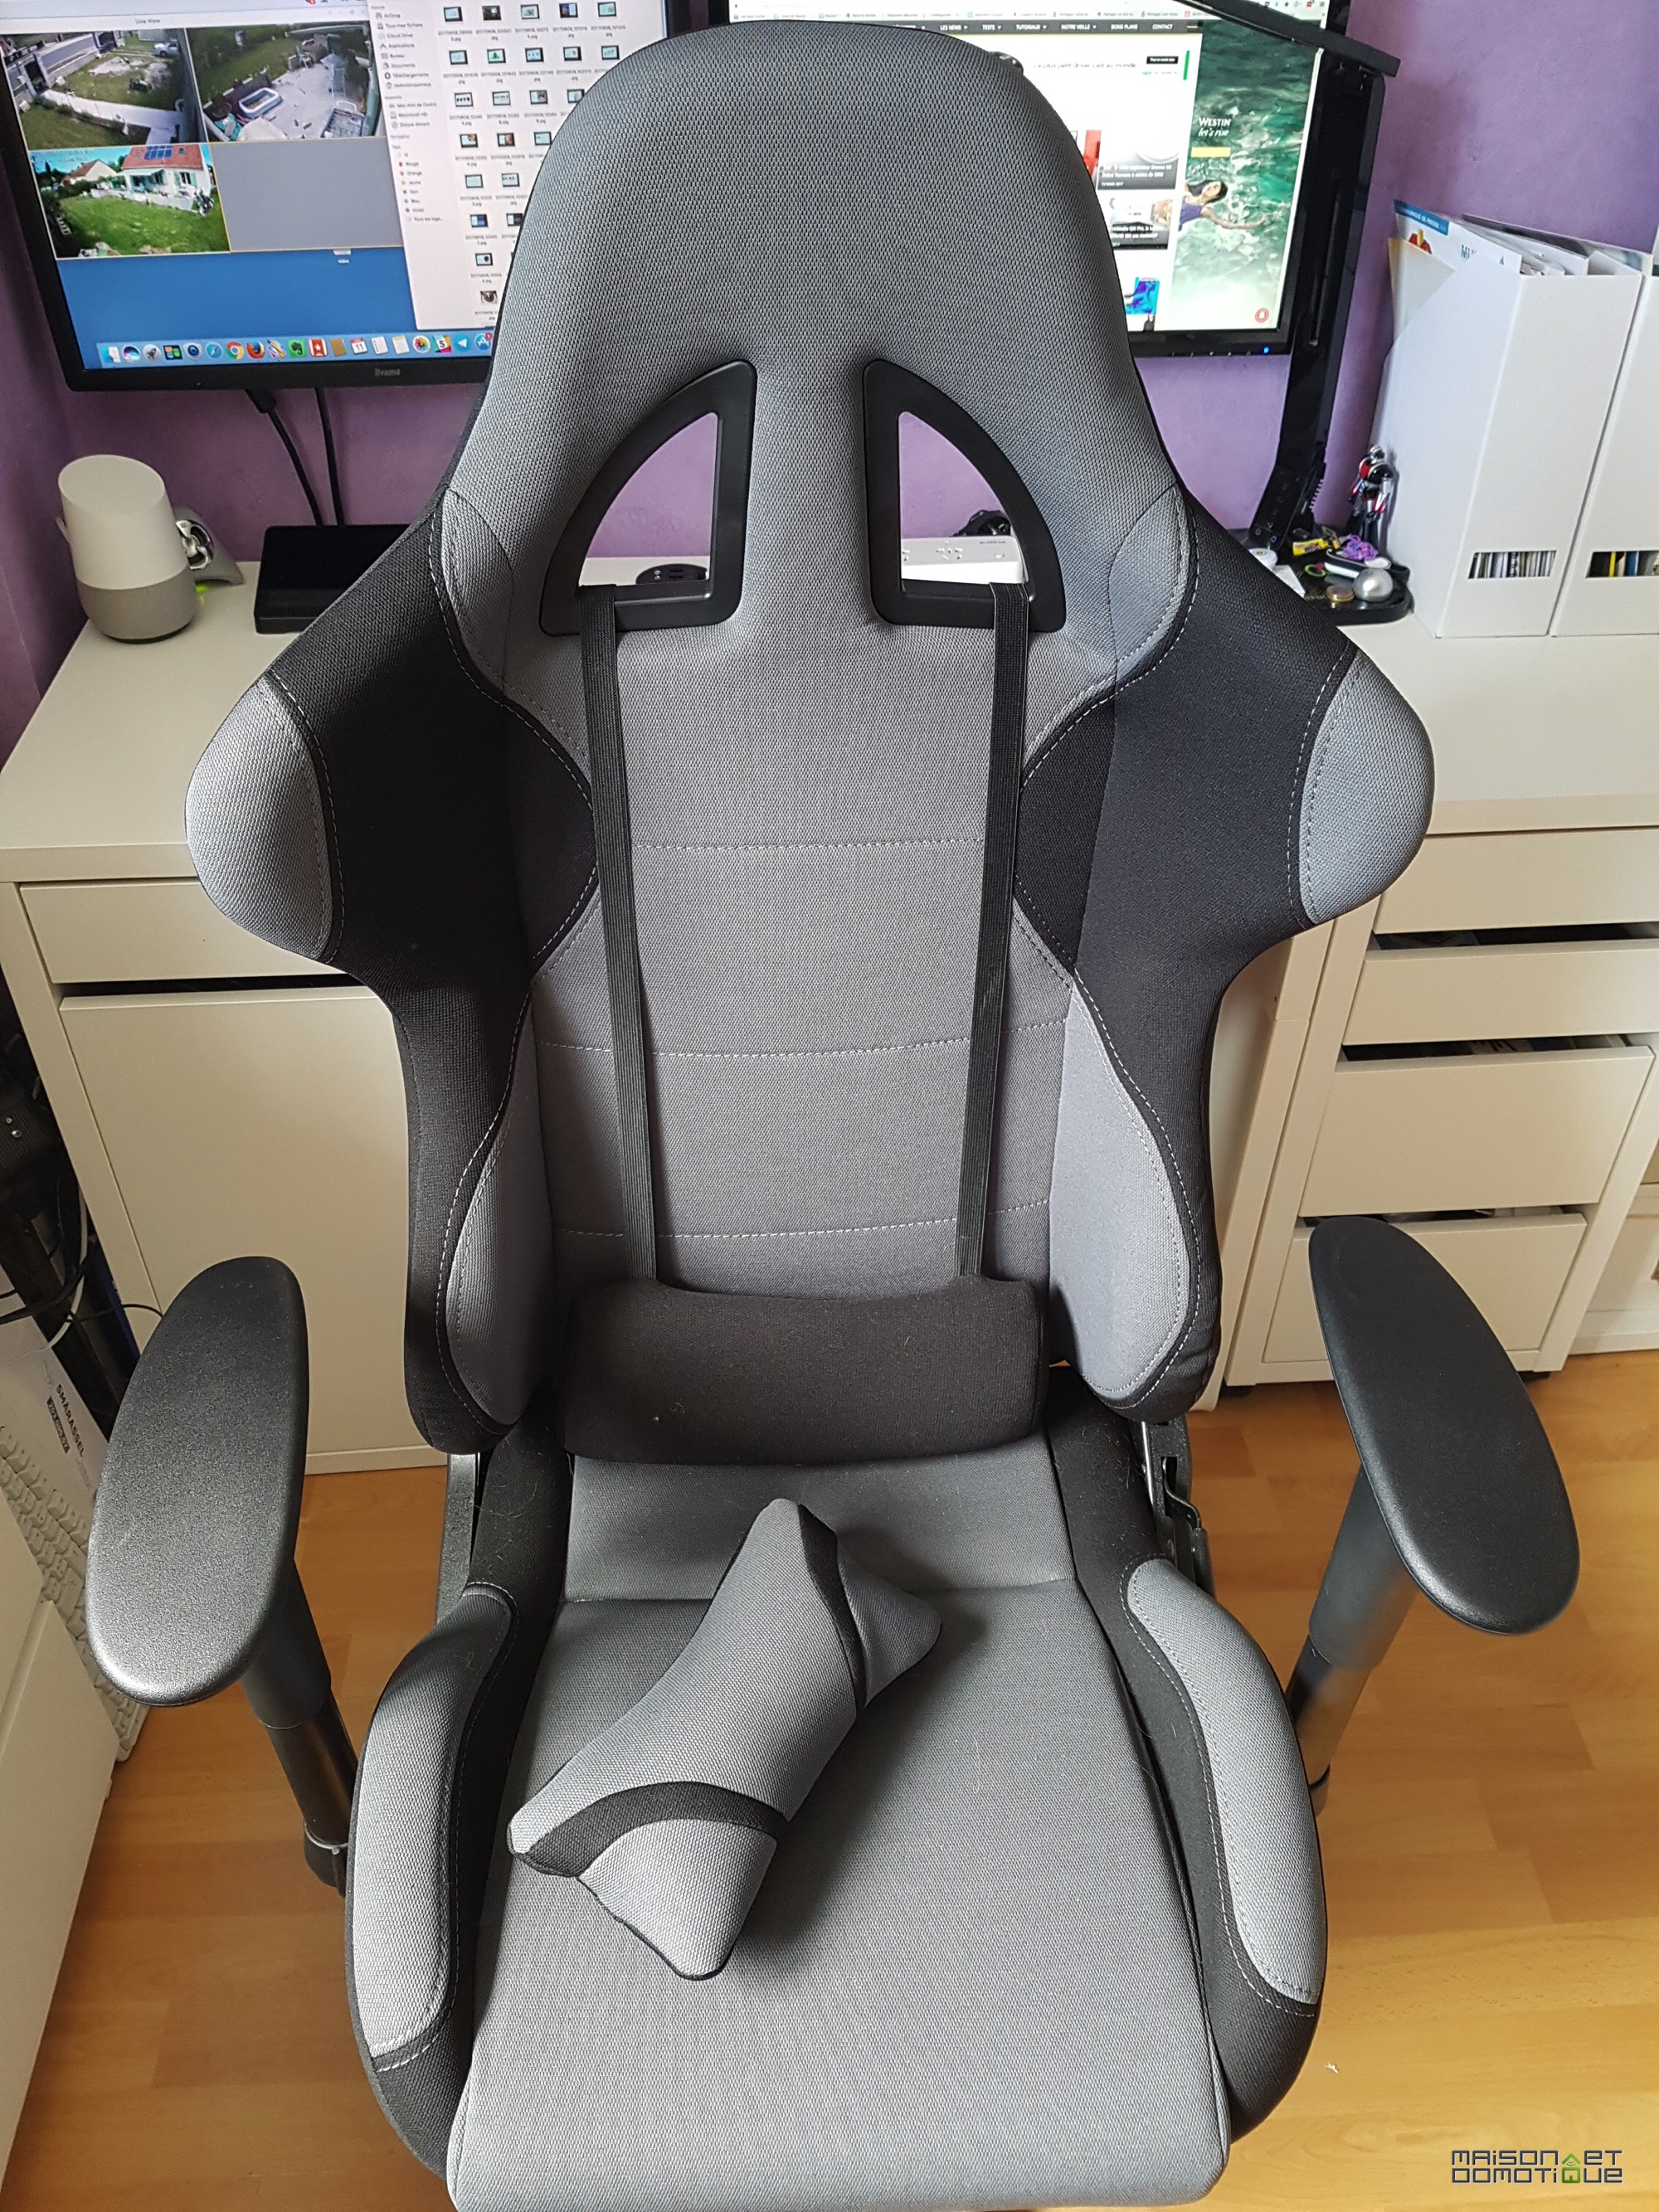 IntimaTe WM Heart Chaise Gaming, Fauteuil Gaming en Tissu Racing